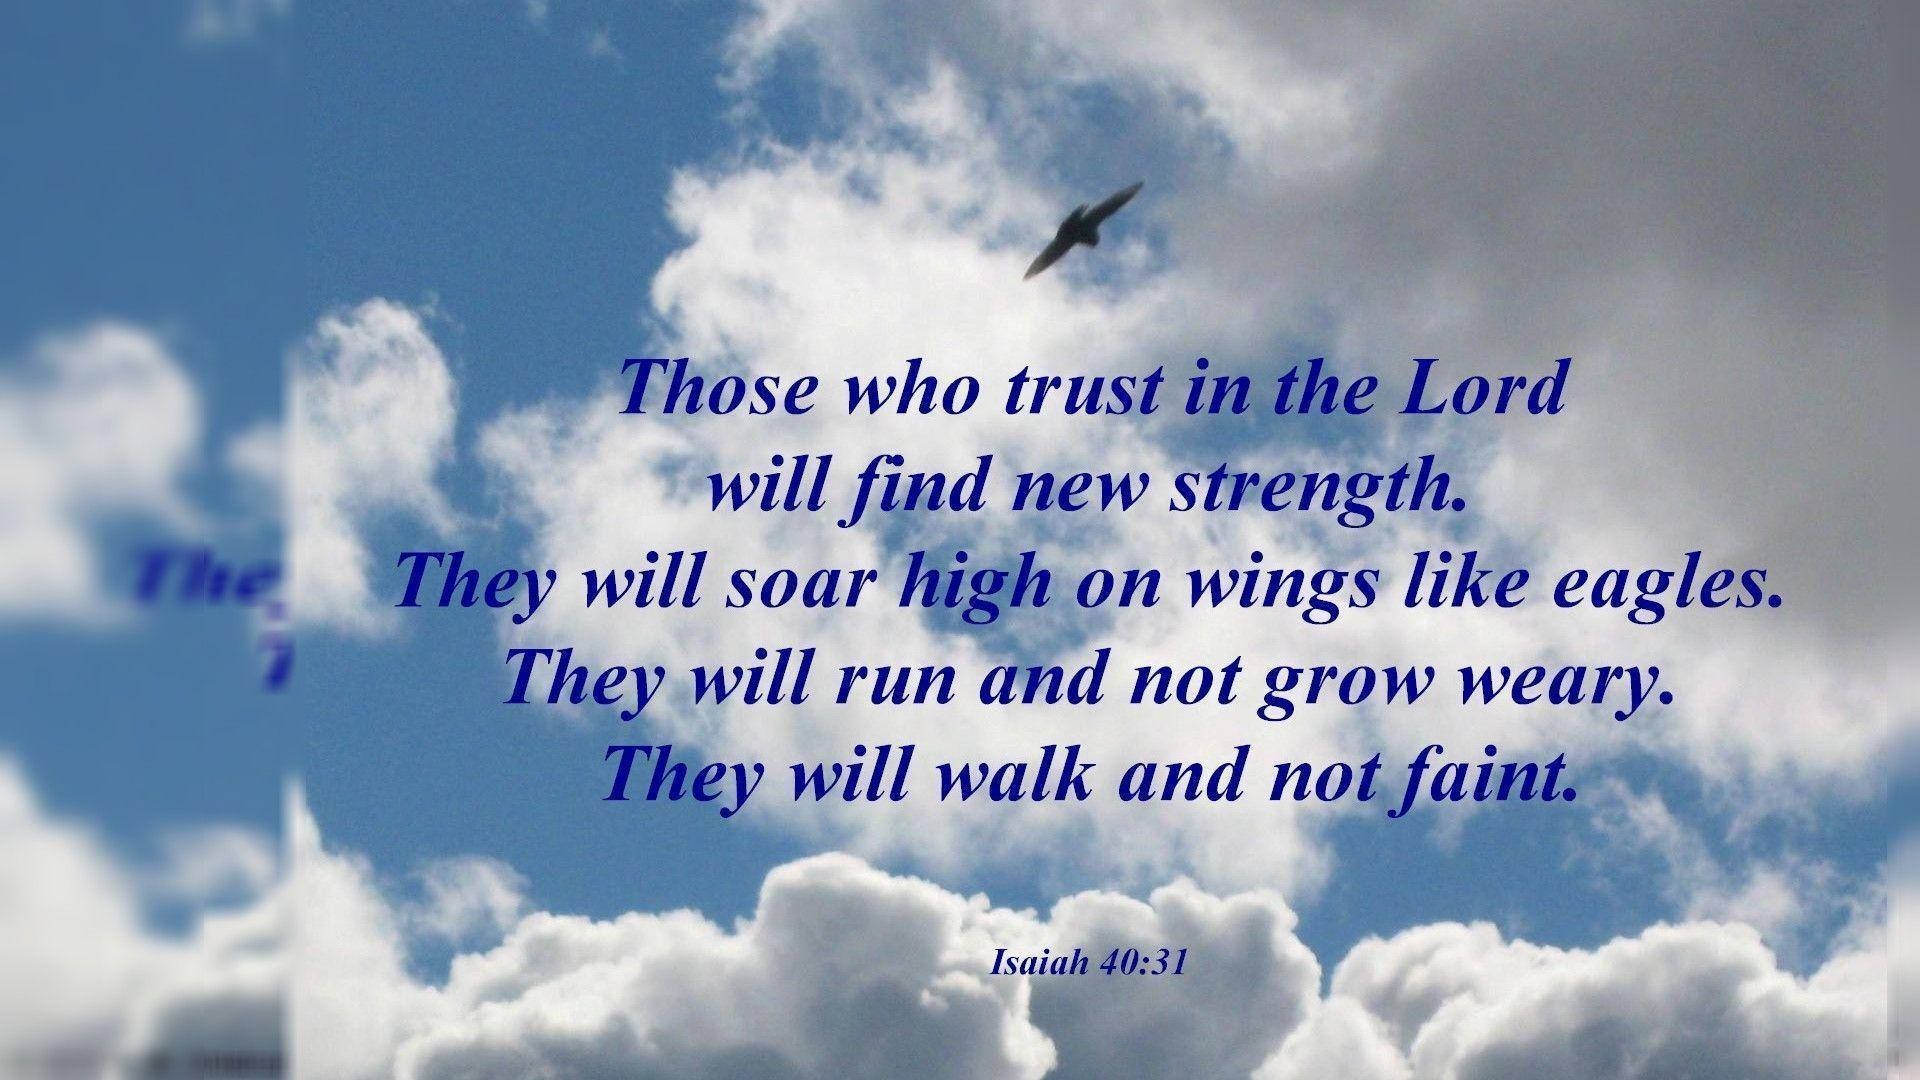 Inspirational Isaiah Verse Scripture from the Bible Wallpaper